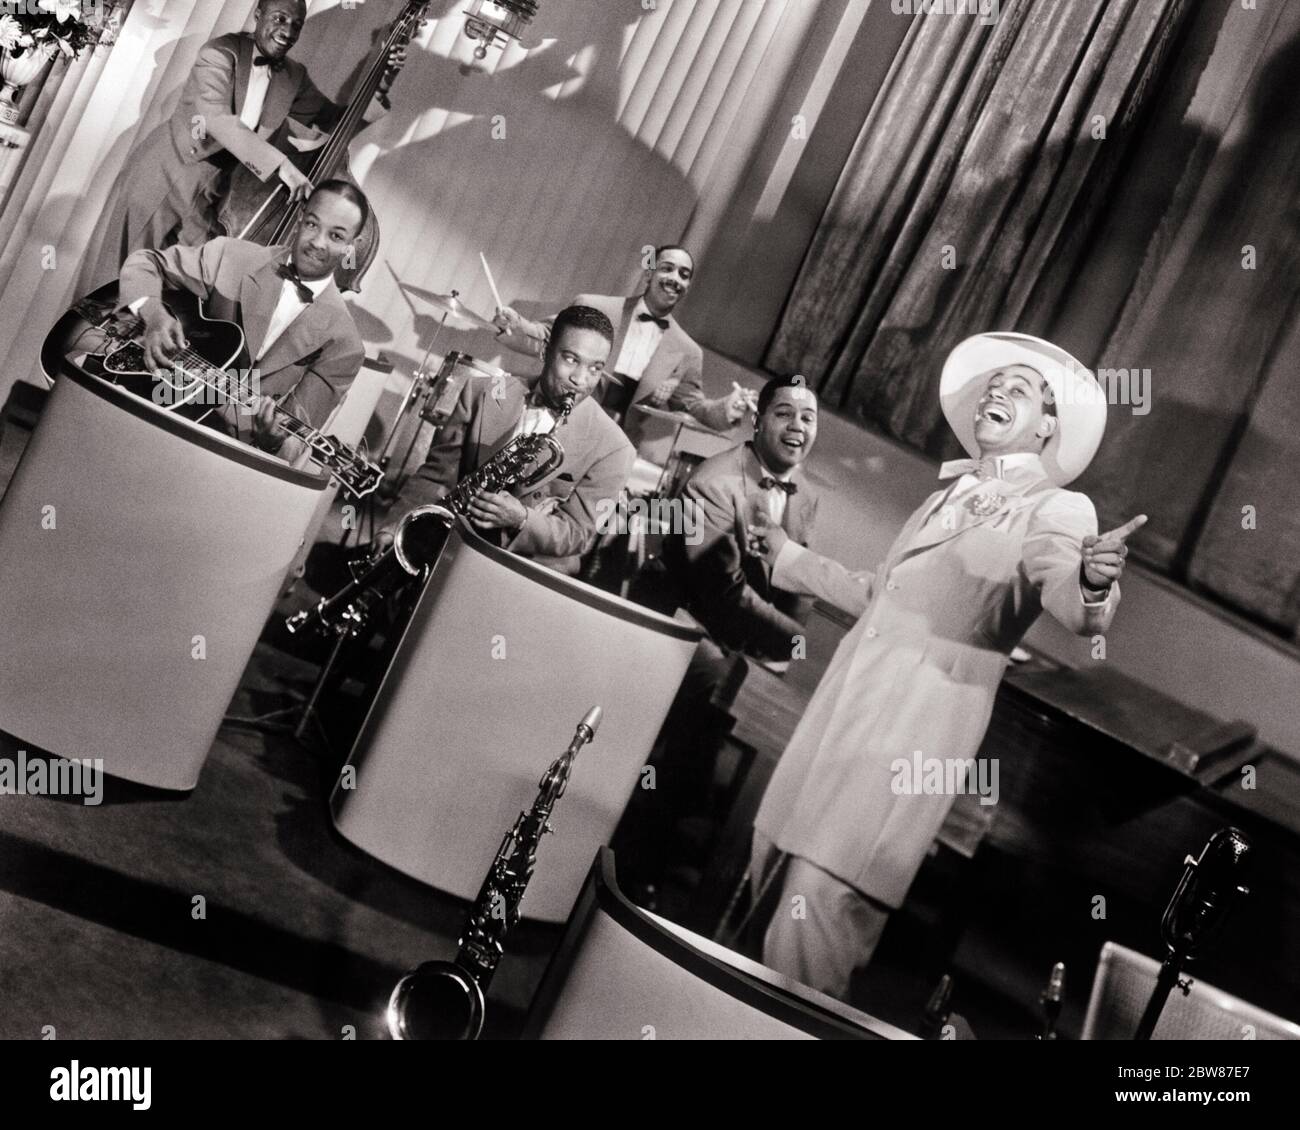 1940s SINGER BANDLEADER AFRICAN AMERICAN CAB CALLOWAY AND FIVE ORCHESTRA MUSICIANS IN PUBLICITY MOVIE STILL FROM STORMY WEATHER - asp fwp1976 ASP001 HARS FILM ROMANCE COMMUNITY URBAN OLD TIME NOSTALGIA OLD FASHION 1 STYLE COMMUNICATION CAREER INSTRUMENTS SINGER TEAMWORK JOY LIFESTYLE ACTOR FIVE HISTORY CELEBRATION CAB 5 JOBS UNITED STATES COPY SPACE FULL-LENGTH HALF-LENGTH DRUMS PERSONS INSPIRATION UNITED STATES OF AMERICA MALES PROFESSION ENTERTAINMENT JIVE STORMY B&W MOVIES MUSICIANS NORTH AMERICA EYE CONTACT NORTH AMERICAN PERFORMING ARTS WIDE ANGLE SKILL OCCUPATION HAPPINESS SKILLS FILMS Stock Photo